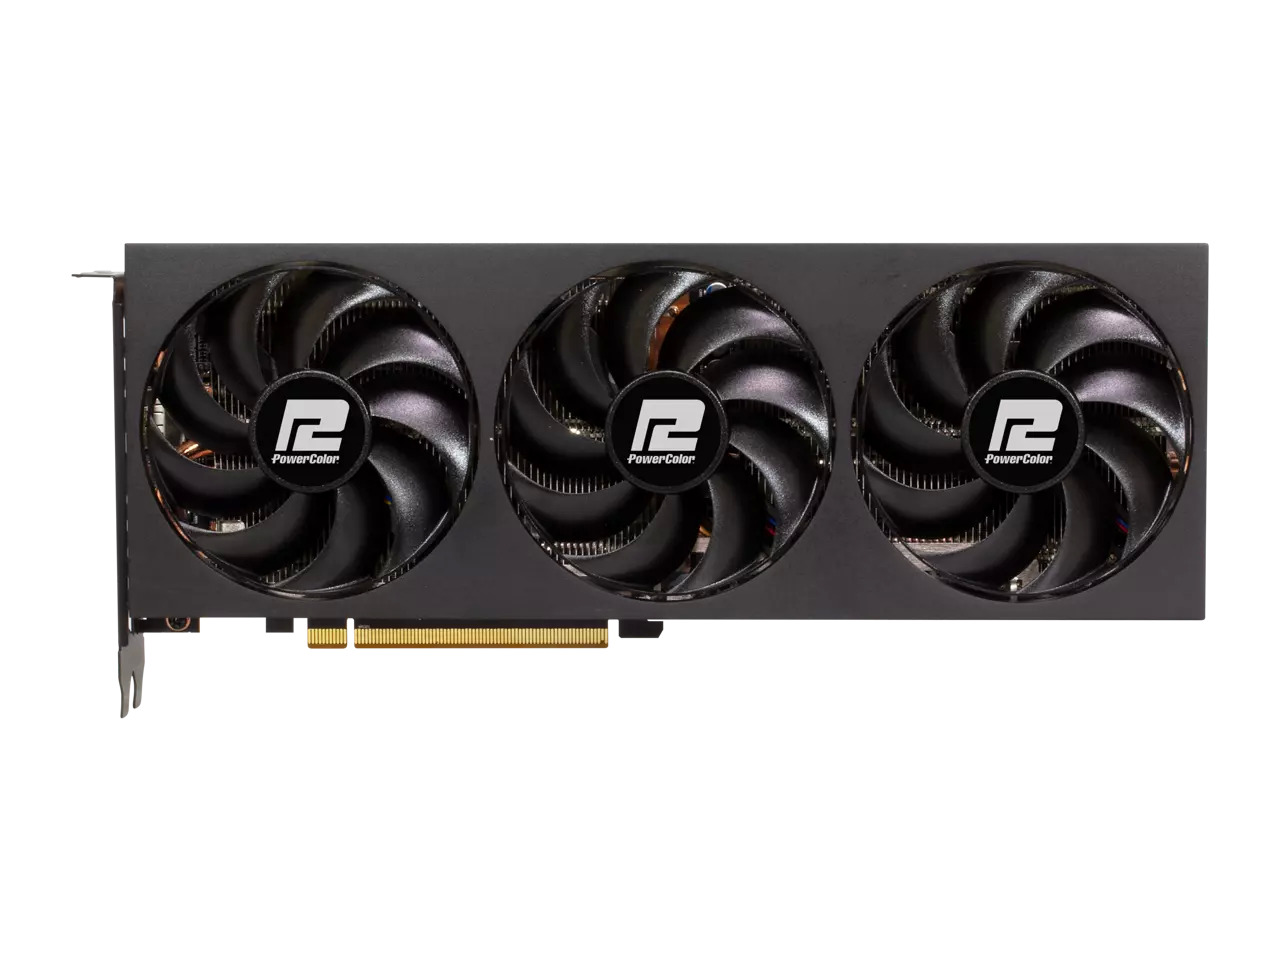 PwoerColor Fighter RX 7900 GRE Graphics Card $520 AC at Newegg via eBay